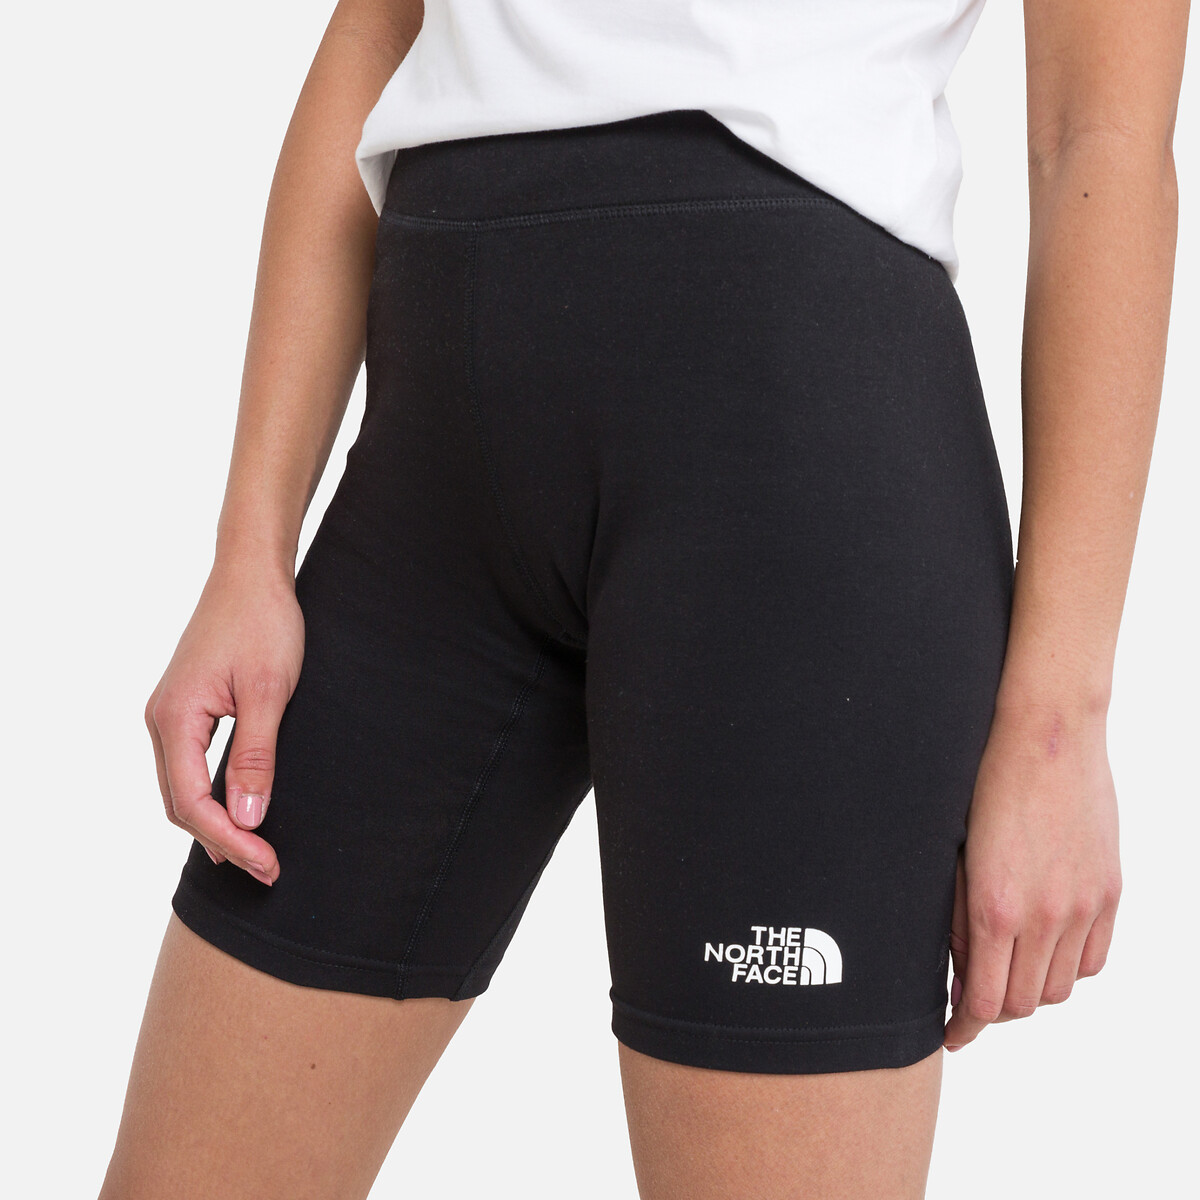 Image of Comfortable Sports Cycling Shorts with Logo Print and High Waist in Cotton